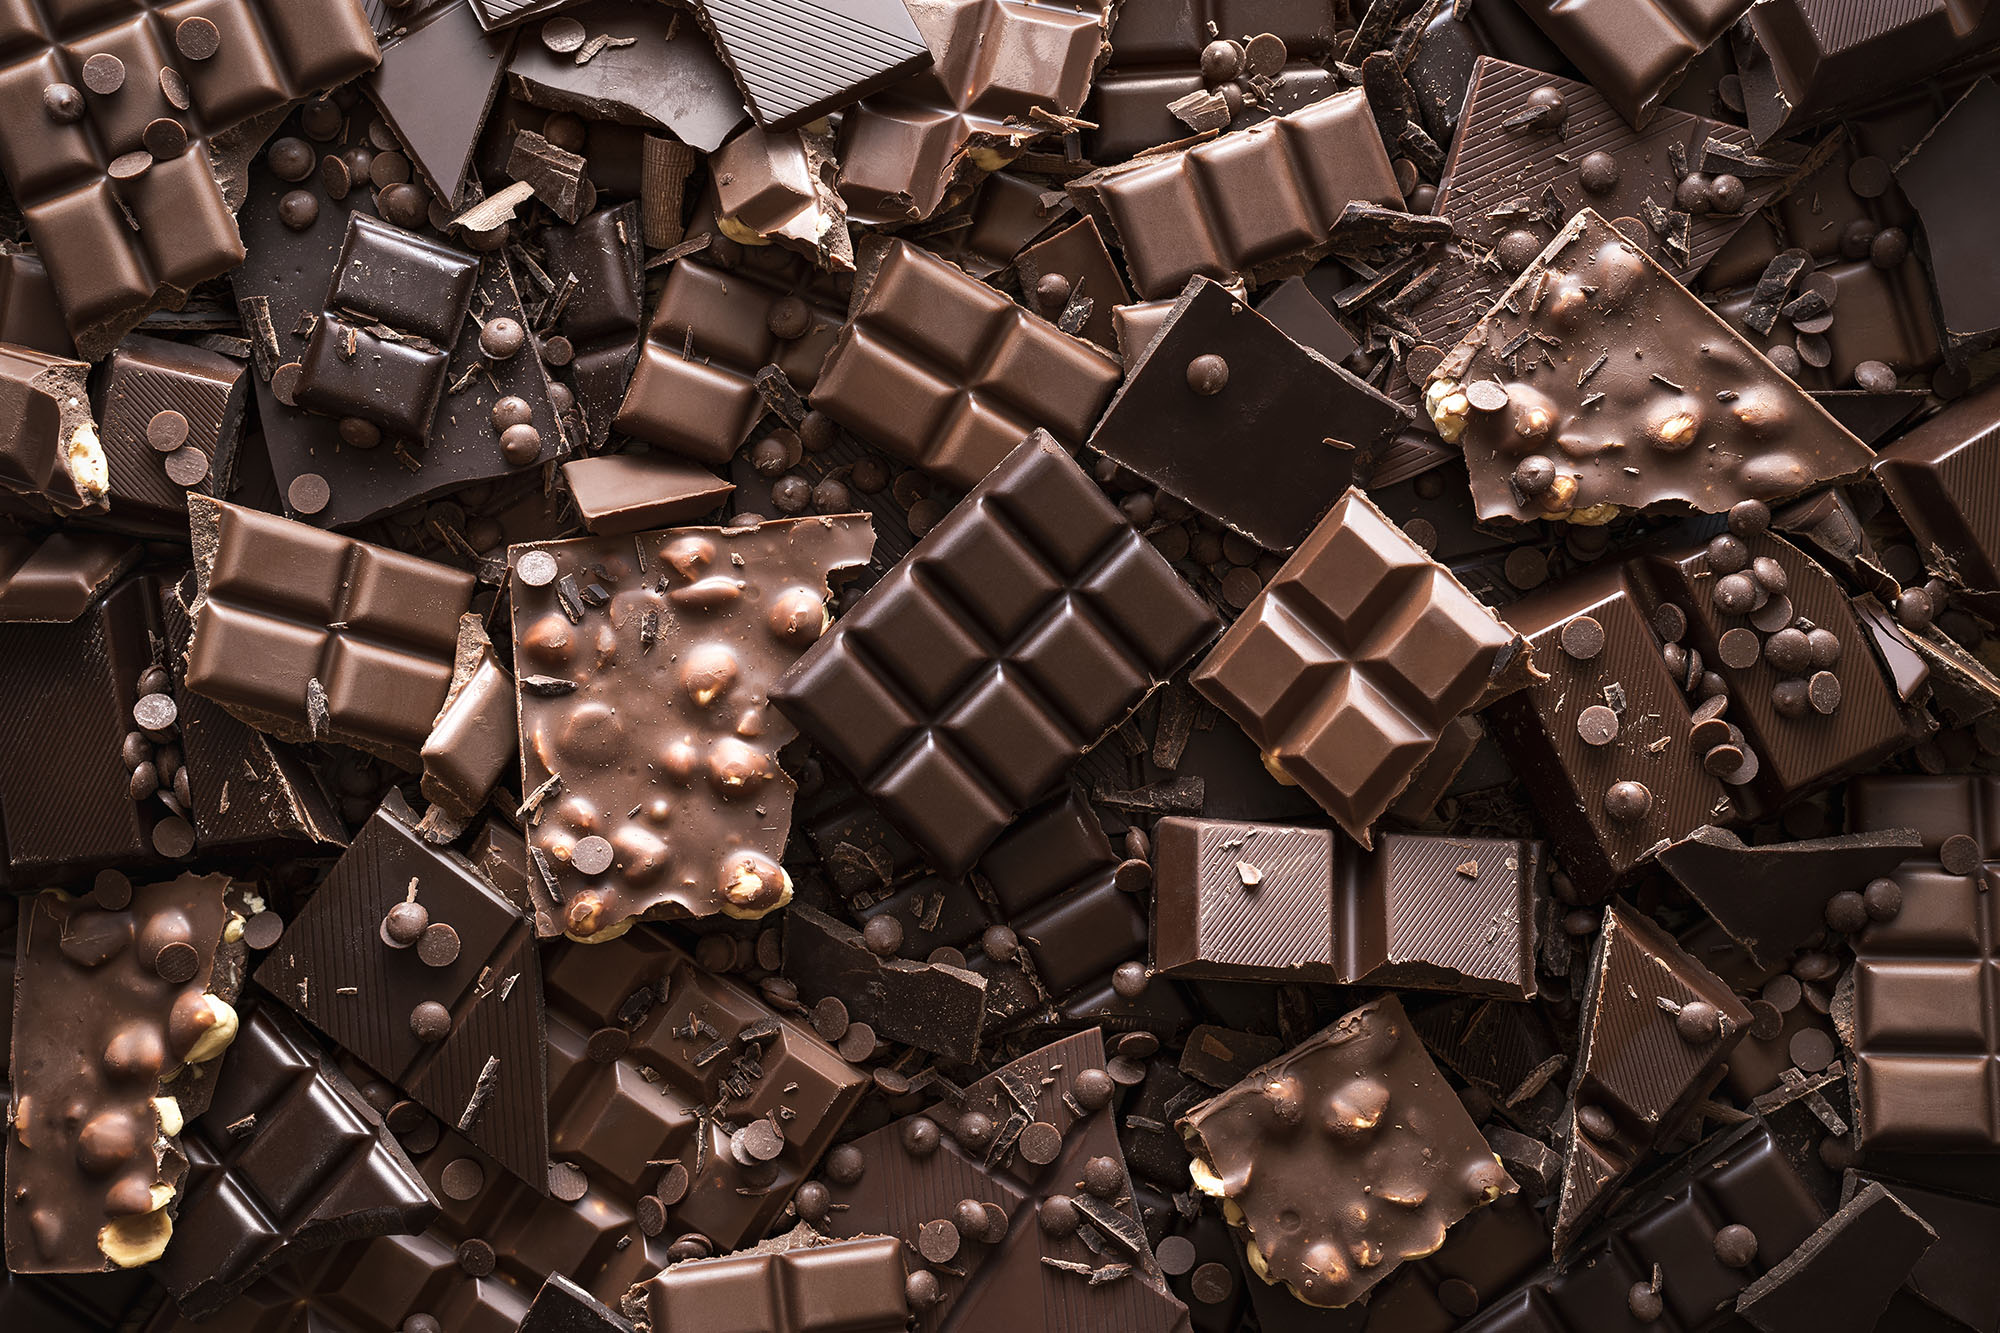 37 interesting facts about Chocolate